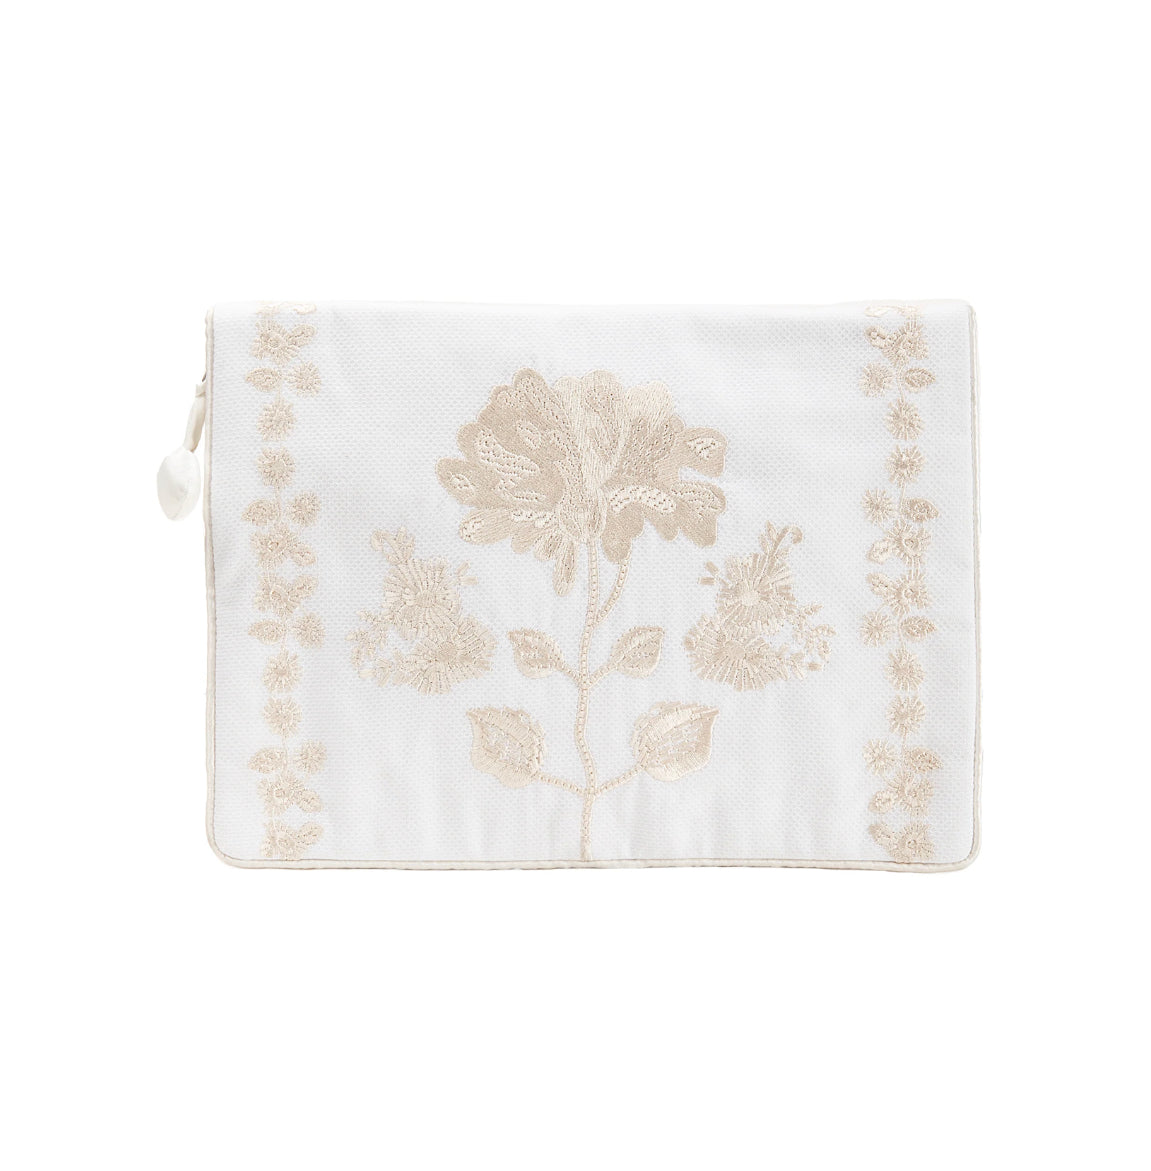 Embroidered Pique Lingerie Envelope with Ivory Satin Trim